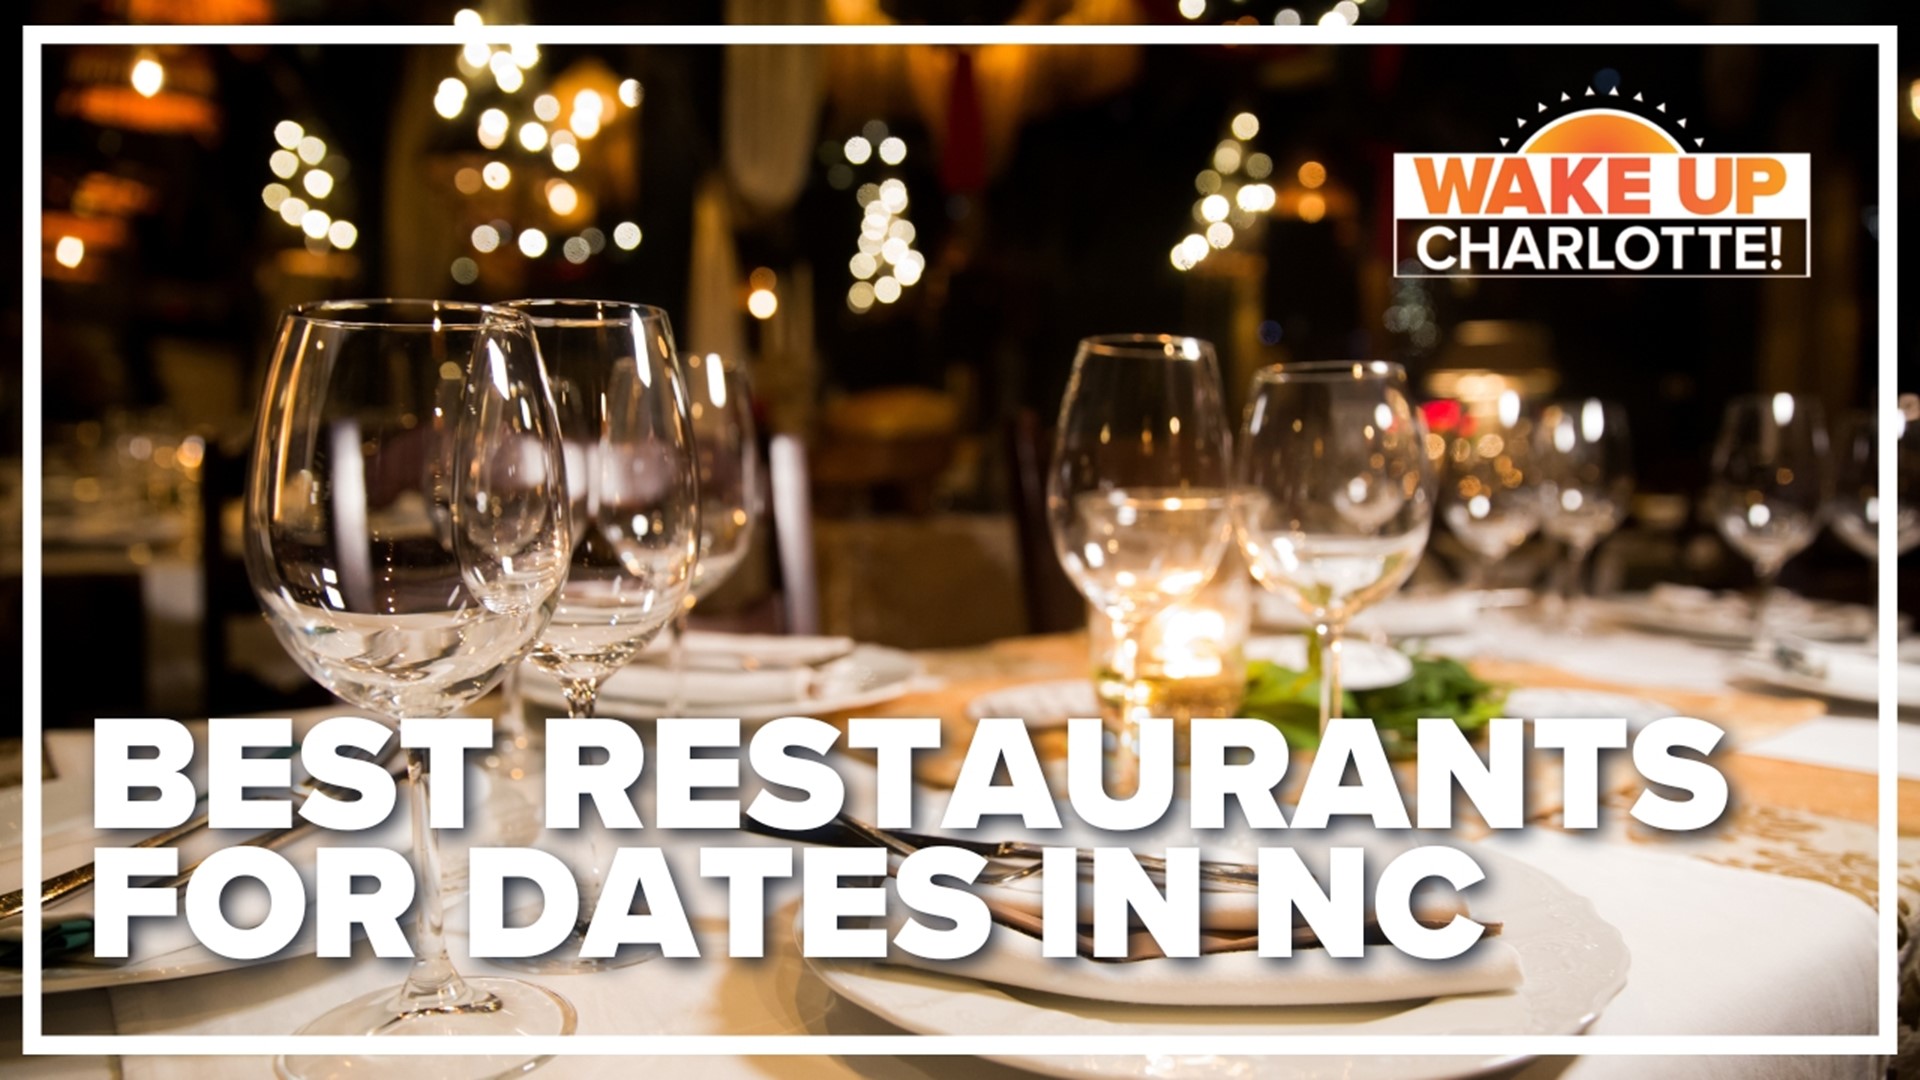 Open table put out a list of the best 100 date night spots in America, from fancy to cozy and casual. Three restaurants are here in North Carolina.